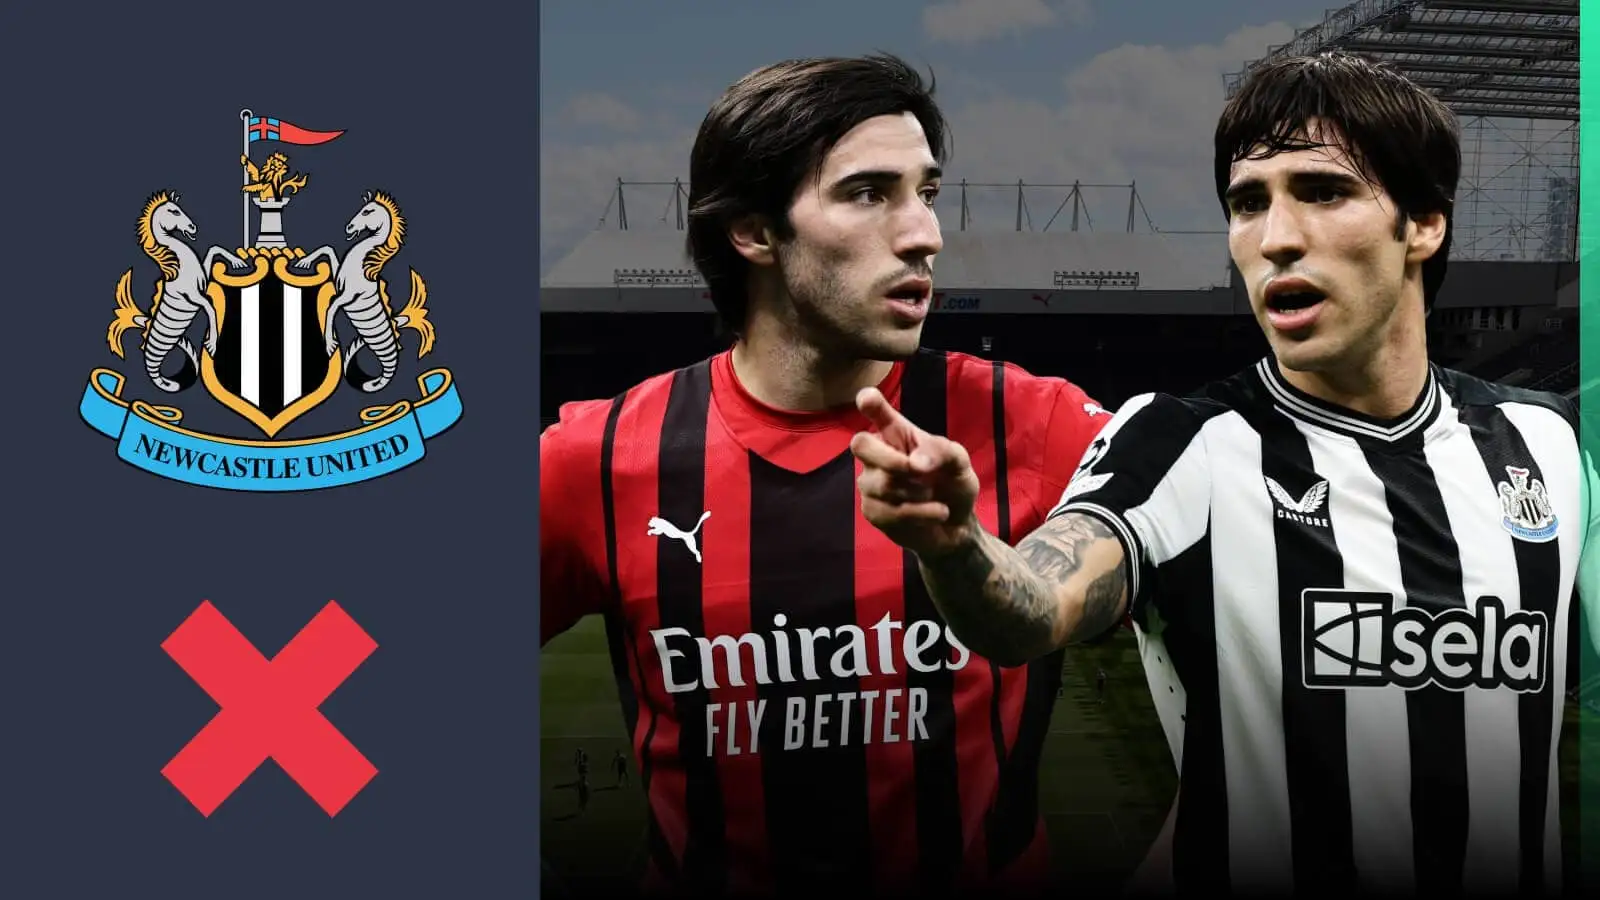 Newcastle star Sandro Tonali faces a 10-month suspension following illegal betting breaches during his AC Milan days